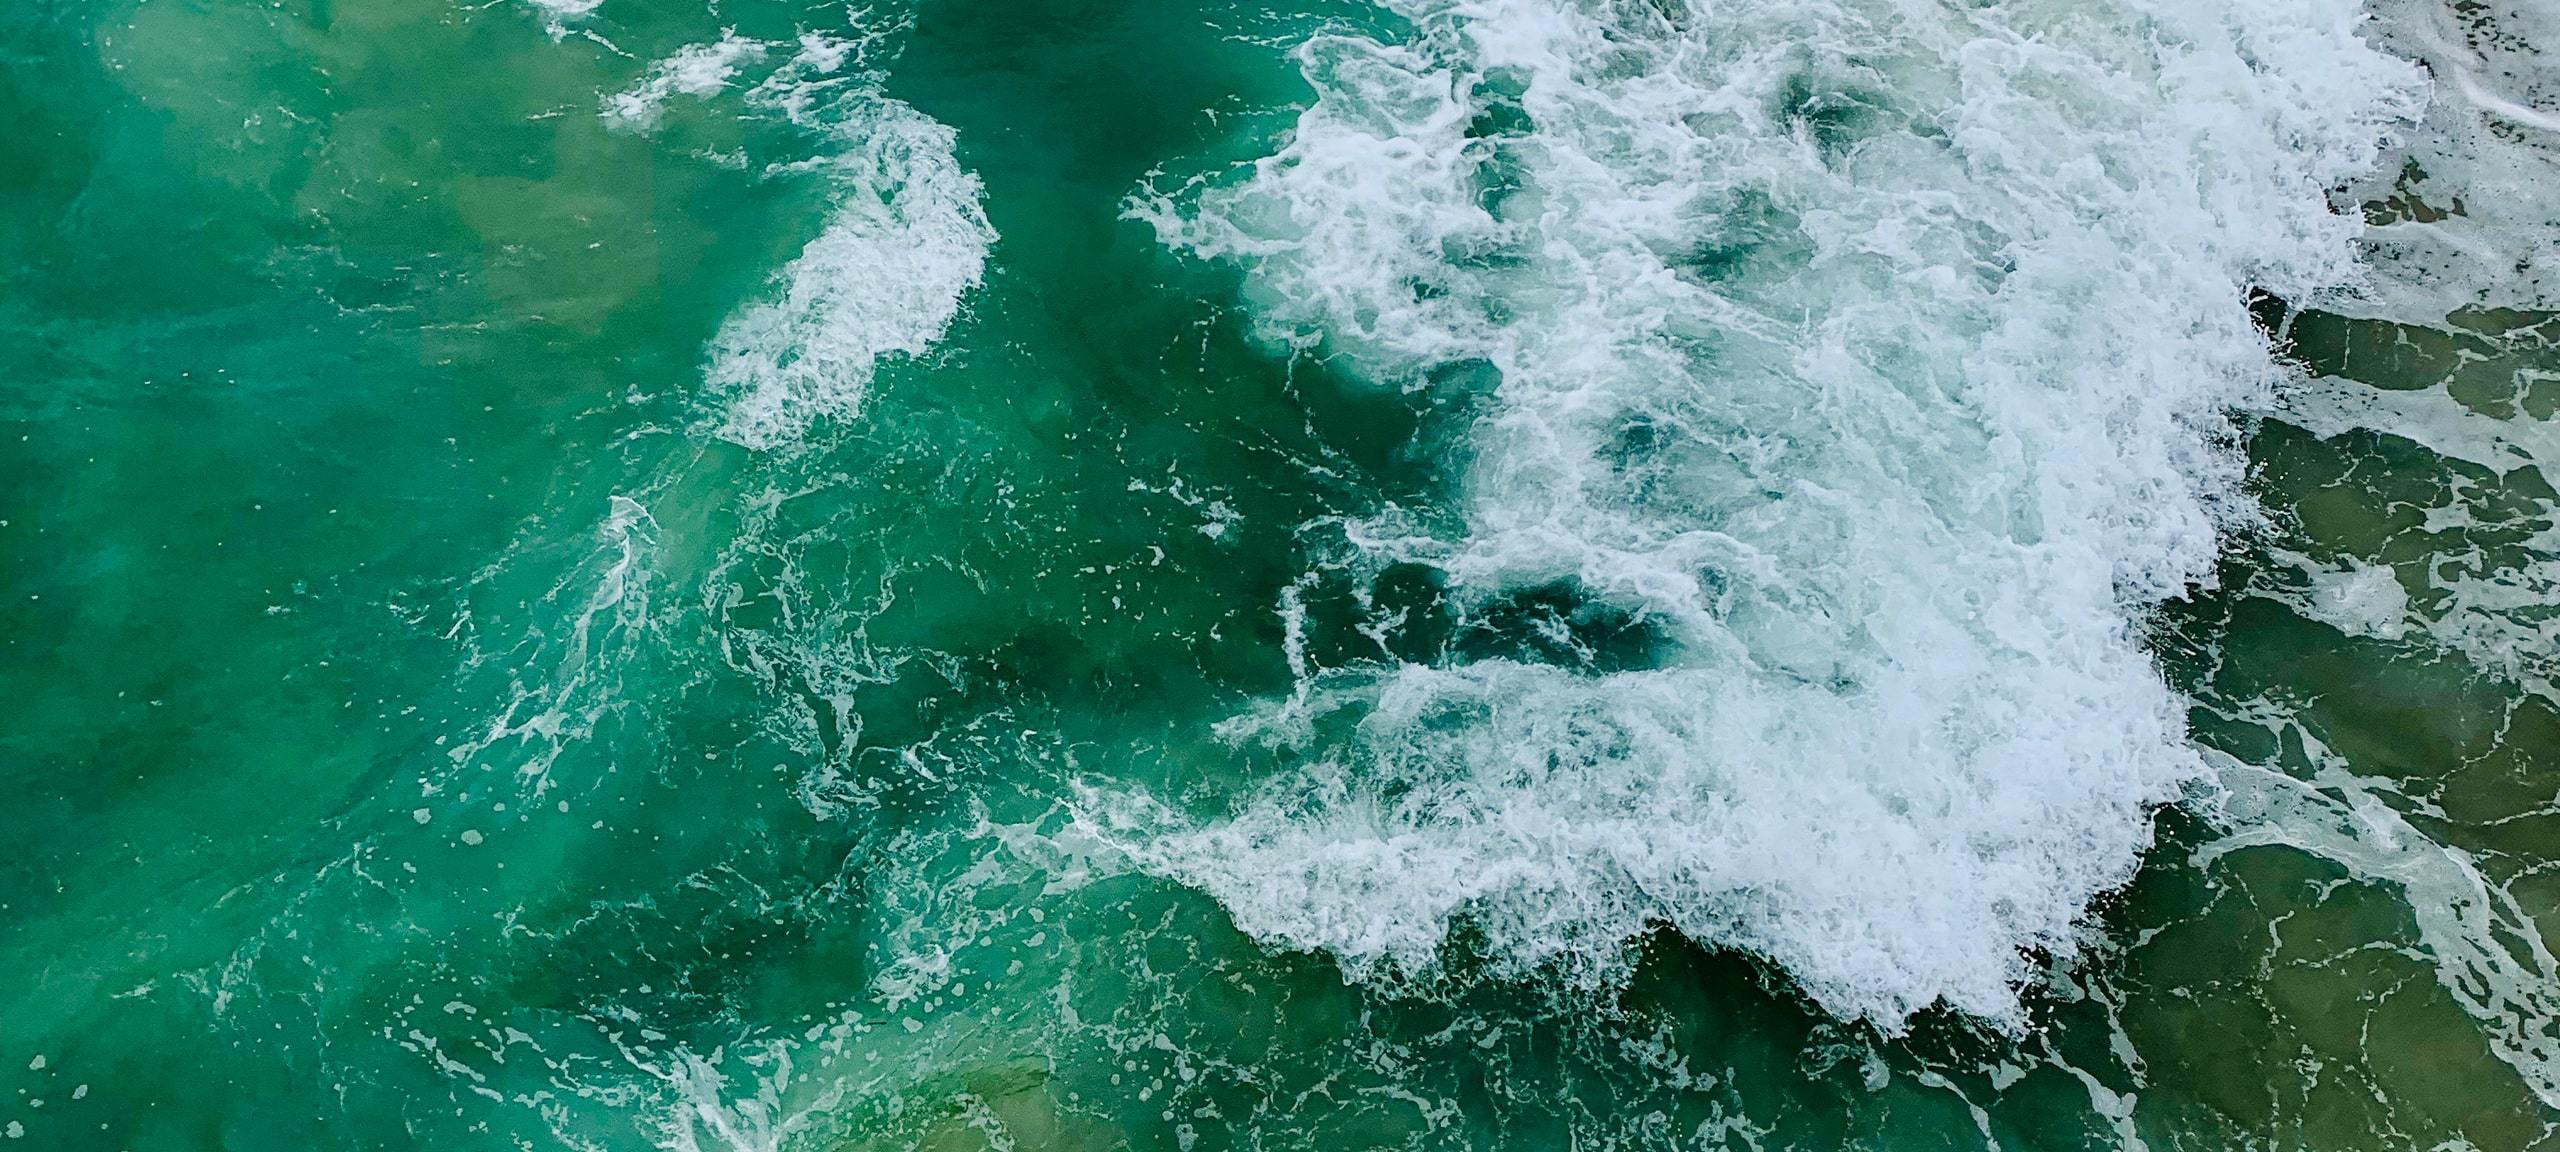 Crashing aerial view of blue waves, New Jersey Shore